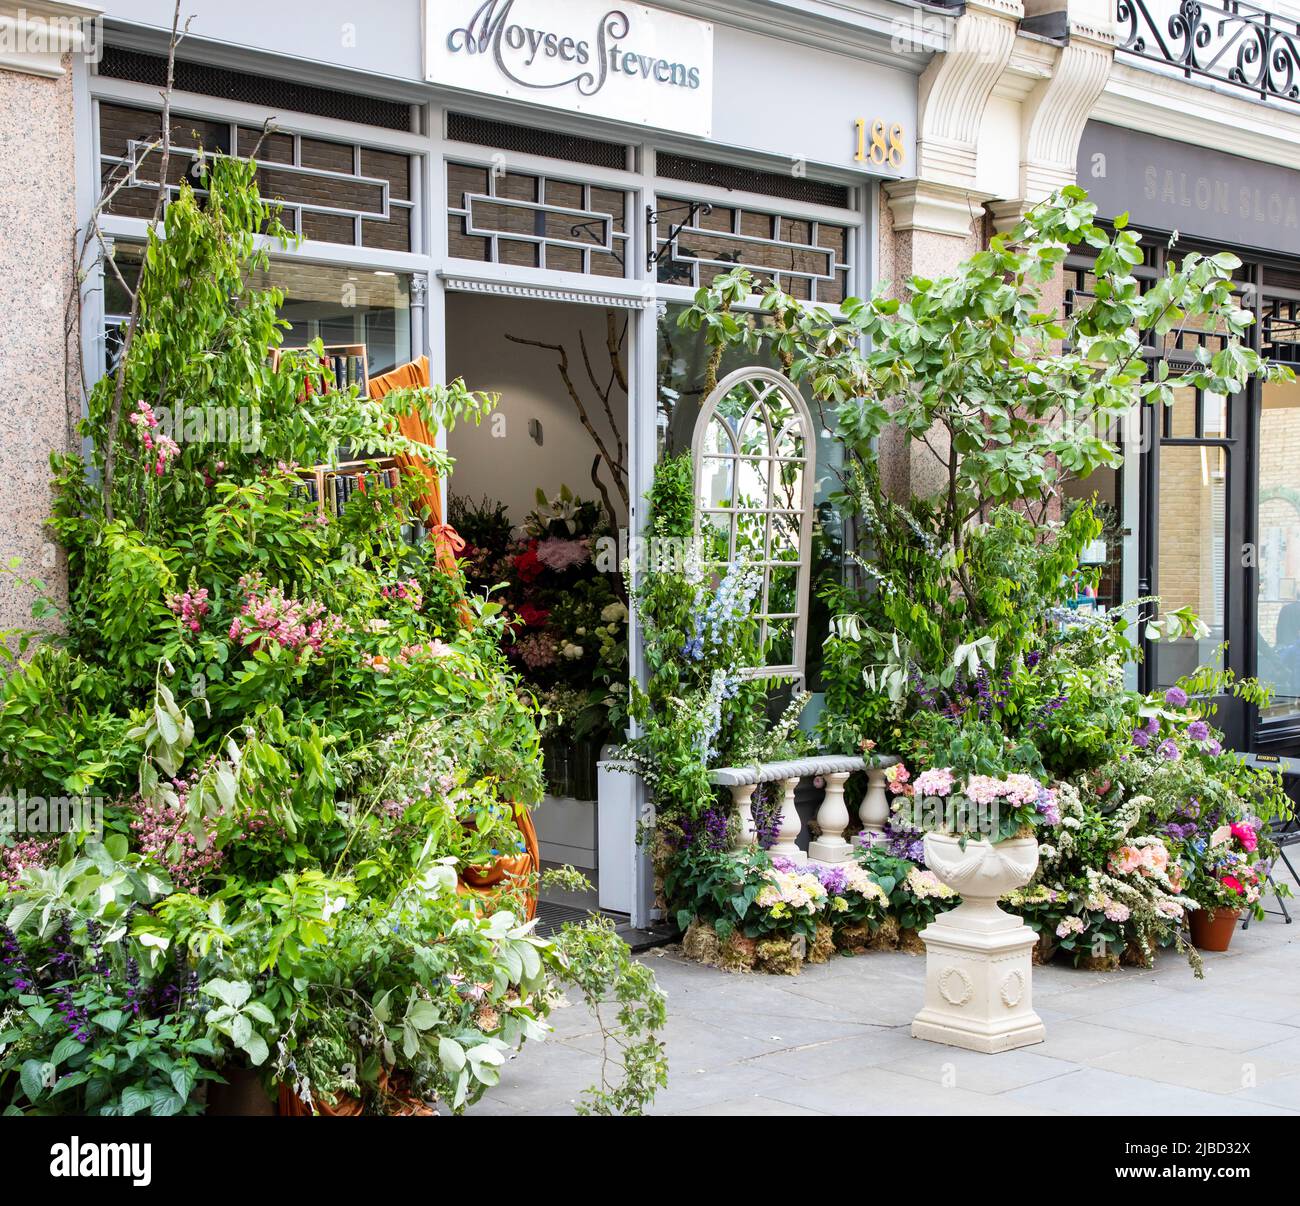 London, May 26, 2022: Streets of Chelsea get decoated with floral displays for annual Chelsea in Bloom competition Stock Photo